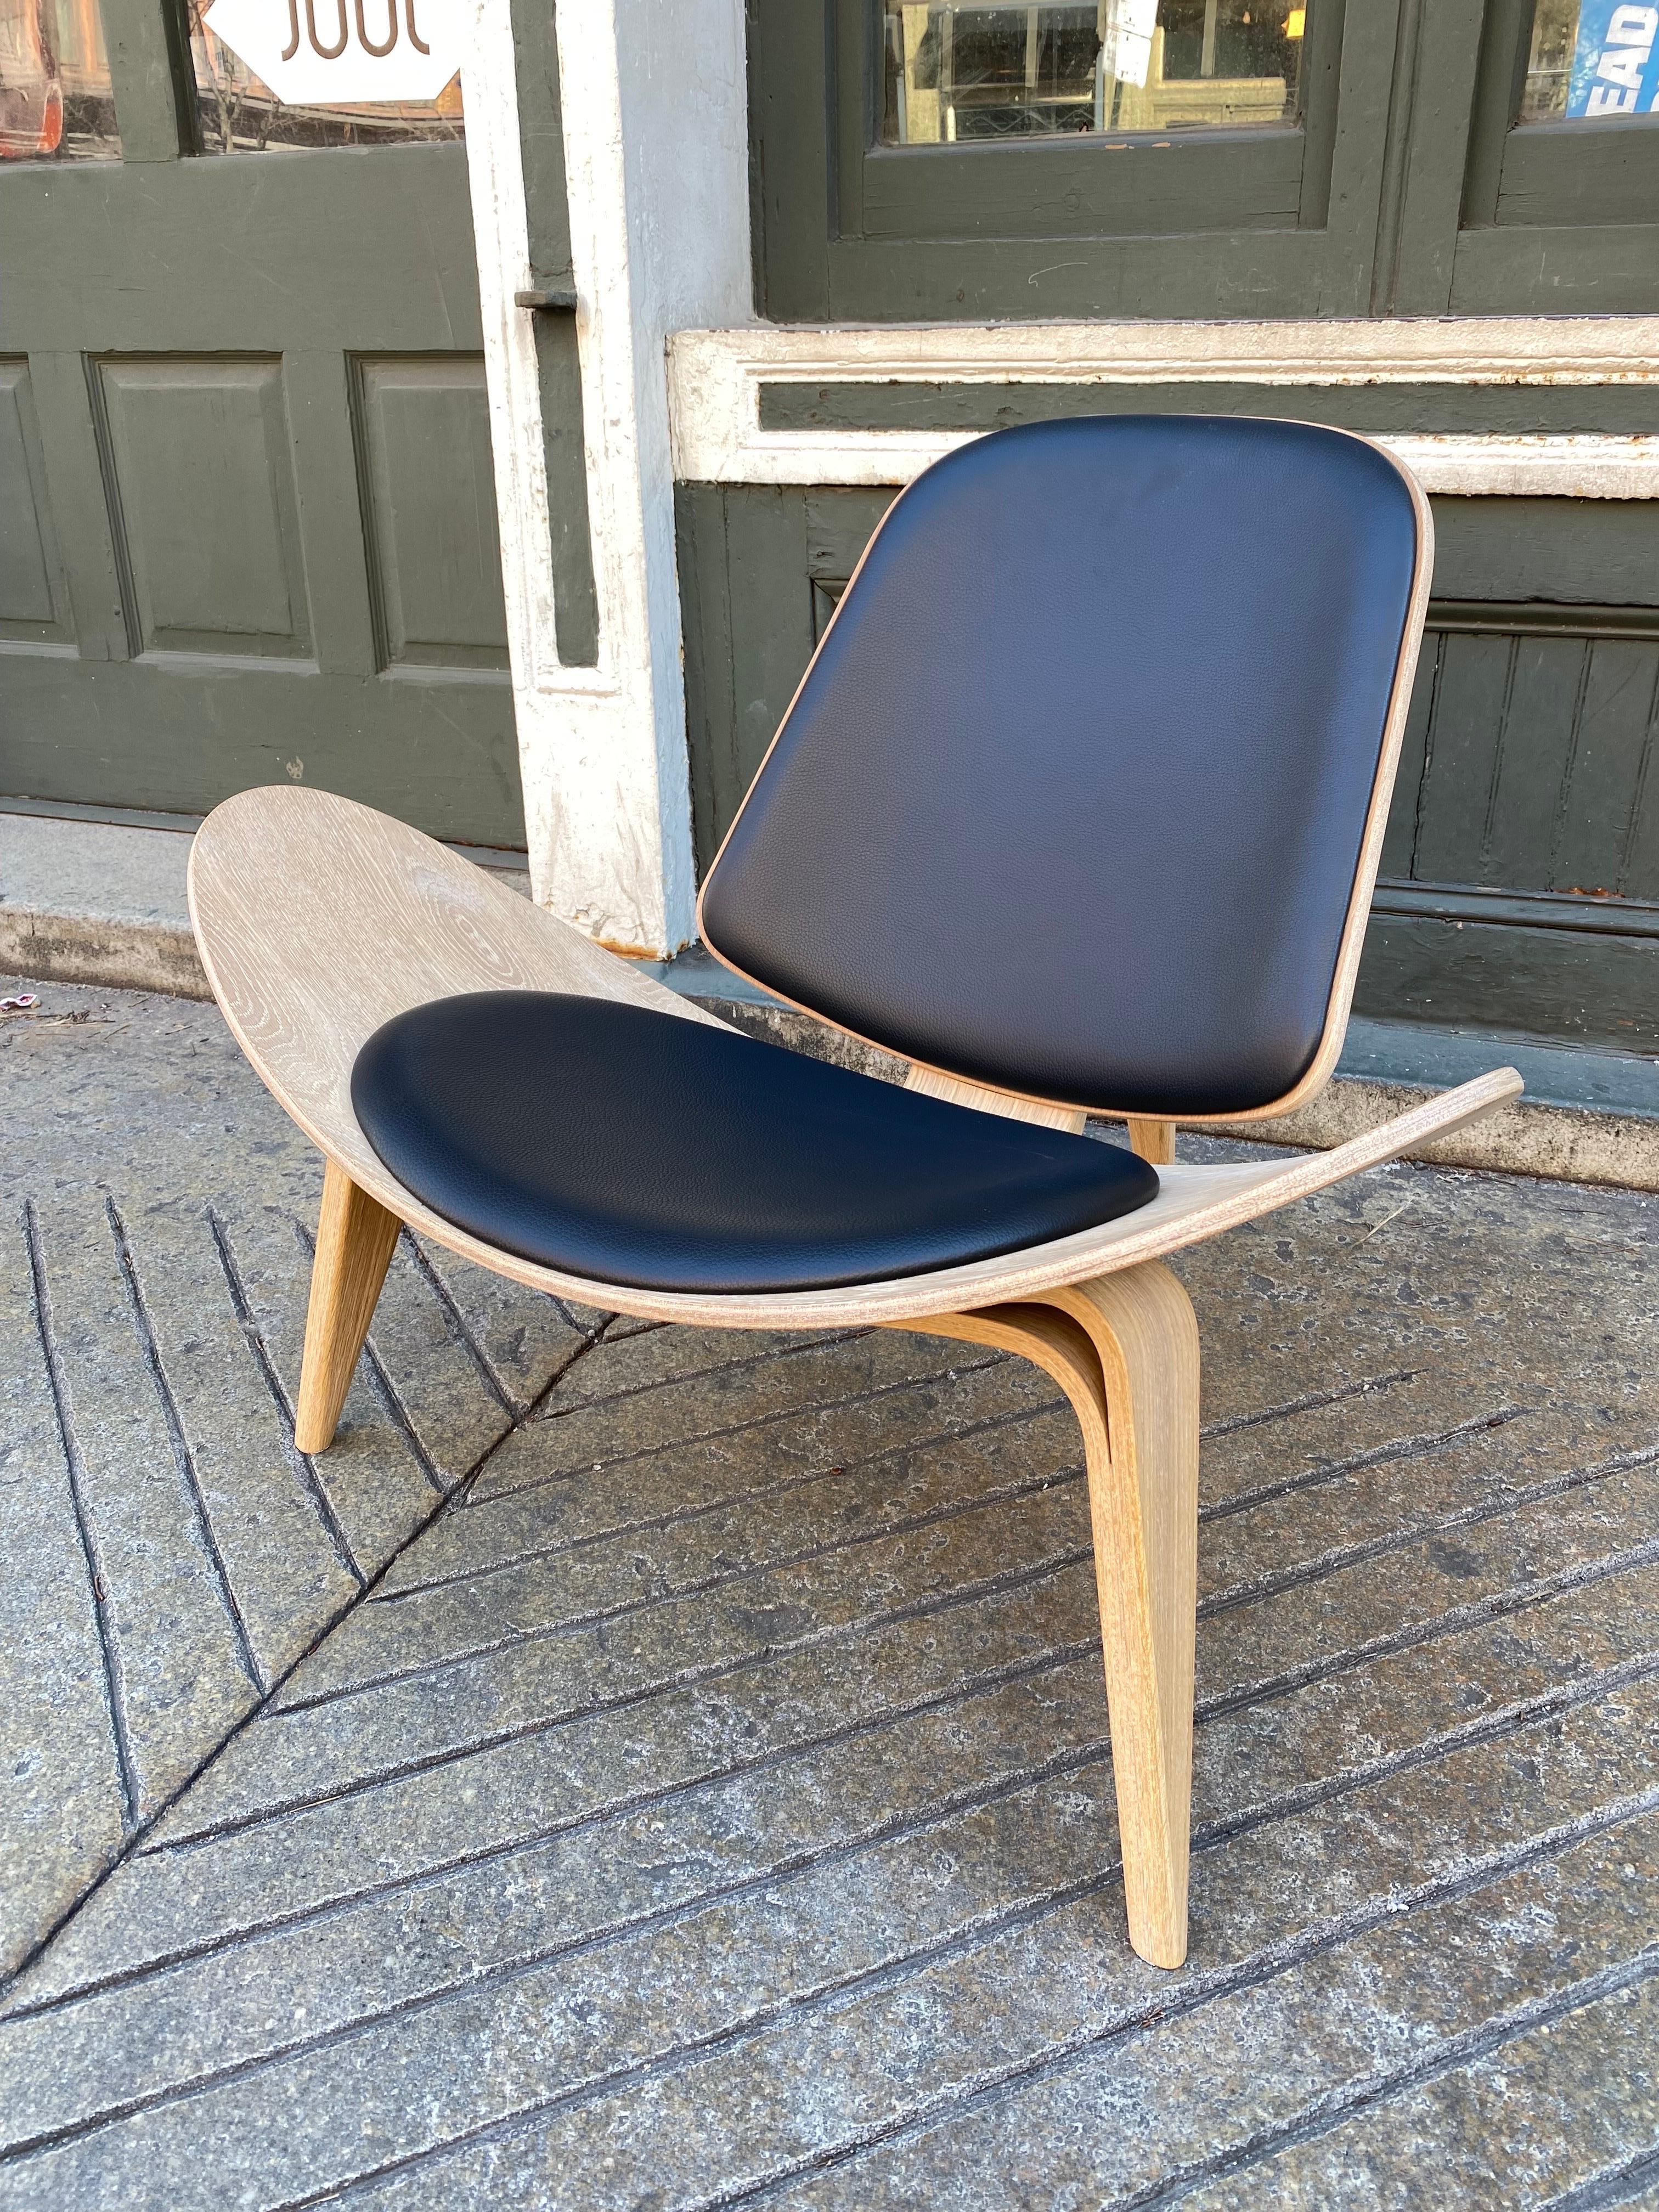 Hans Wegner shell chair, model CH 07. Originally designed in 1963 this chair finally went into large scale production in the late 1990s. Produced by Carl Hansen this is one comfortable chair! This chair is only one year old! Like new condition!